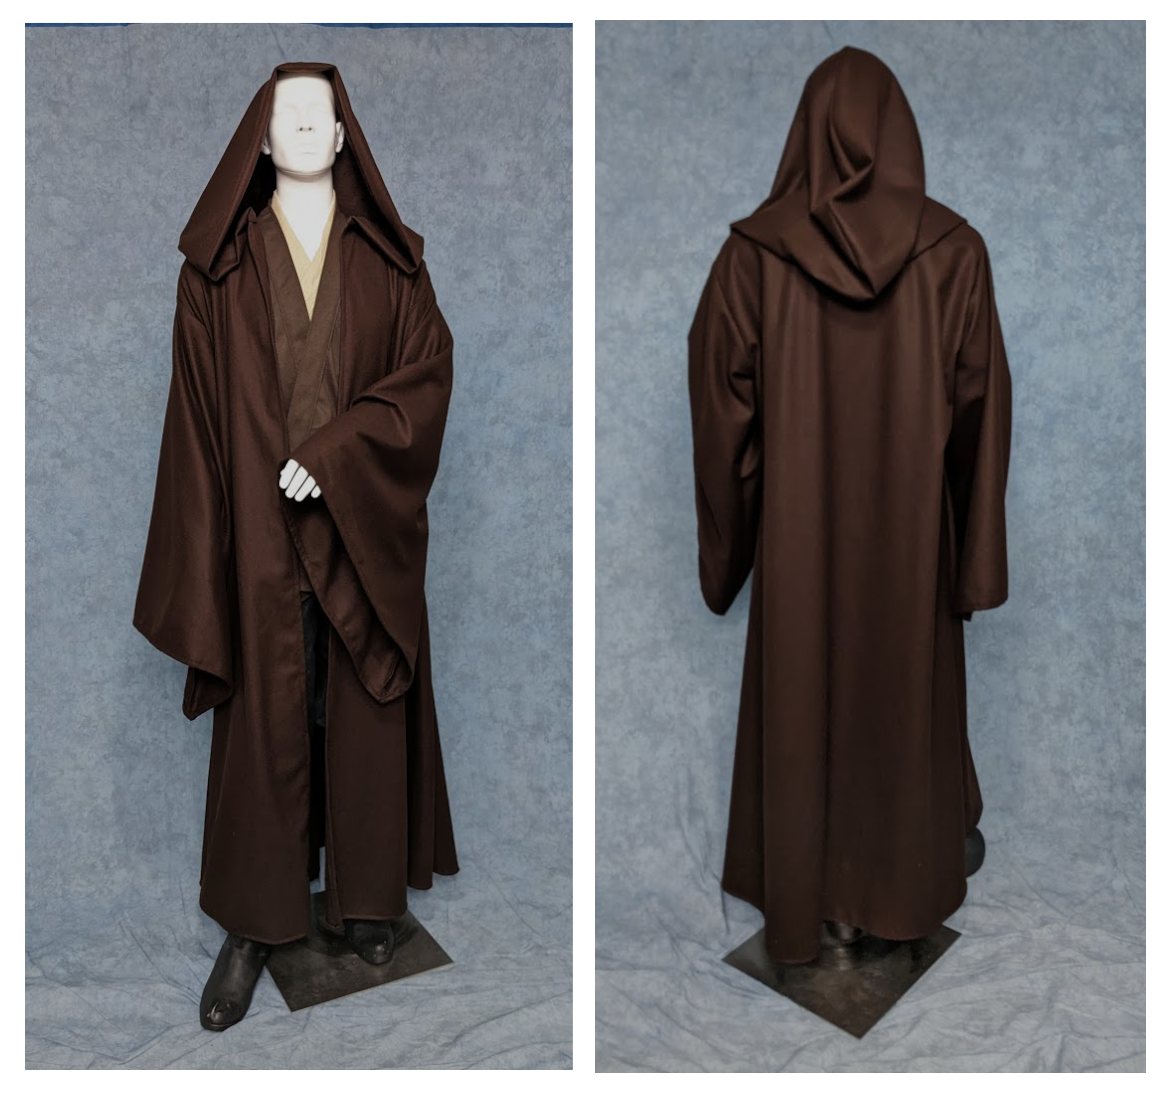 Jedi robes, brown wool example